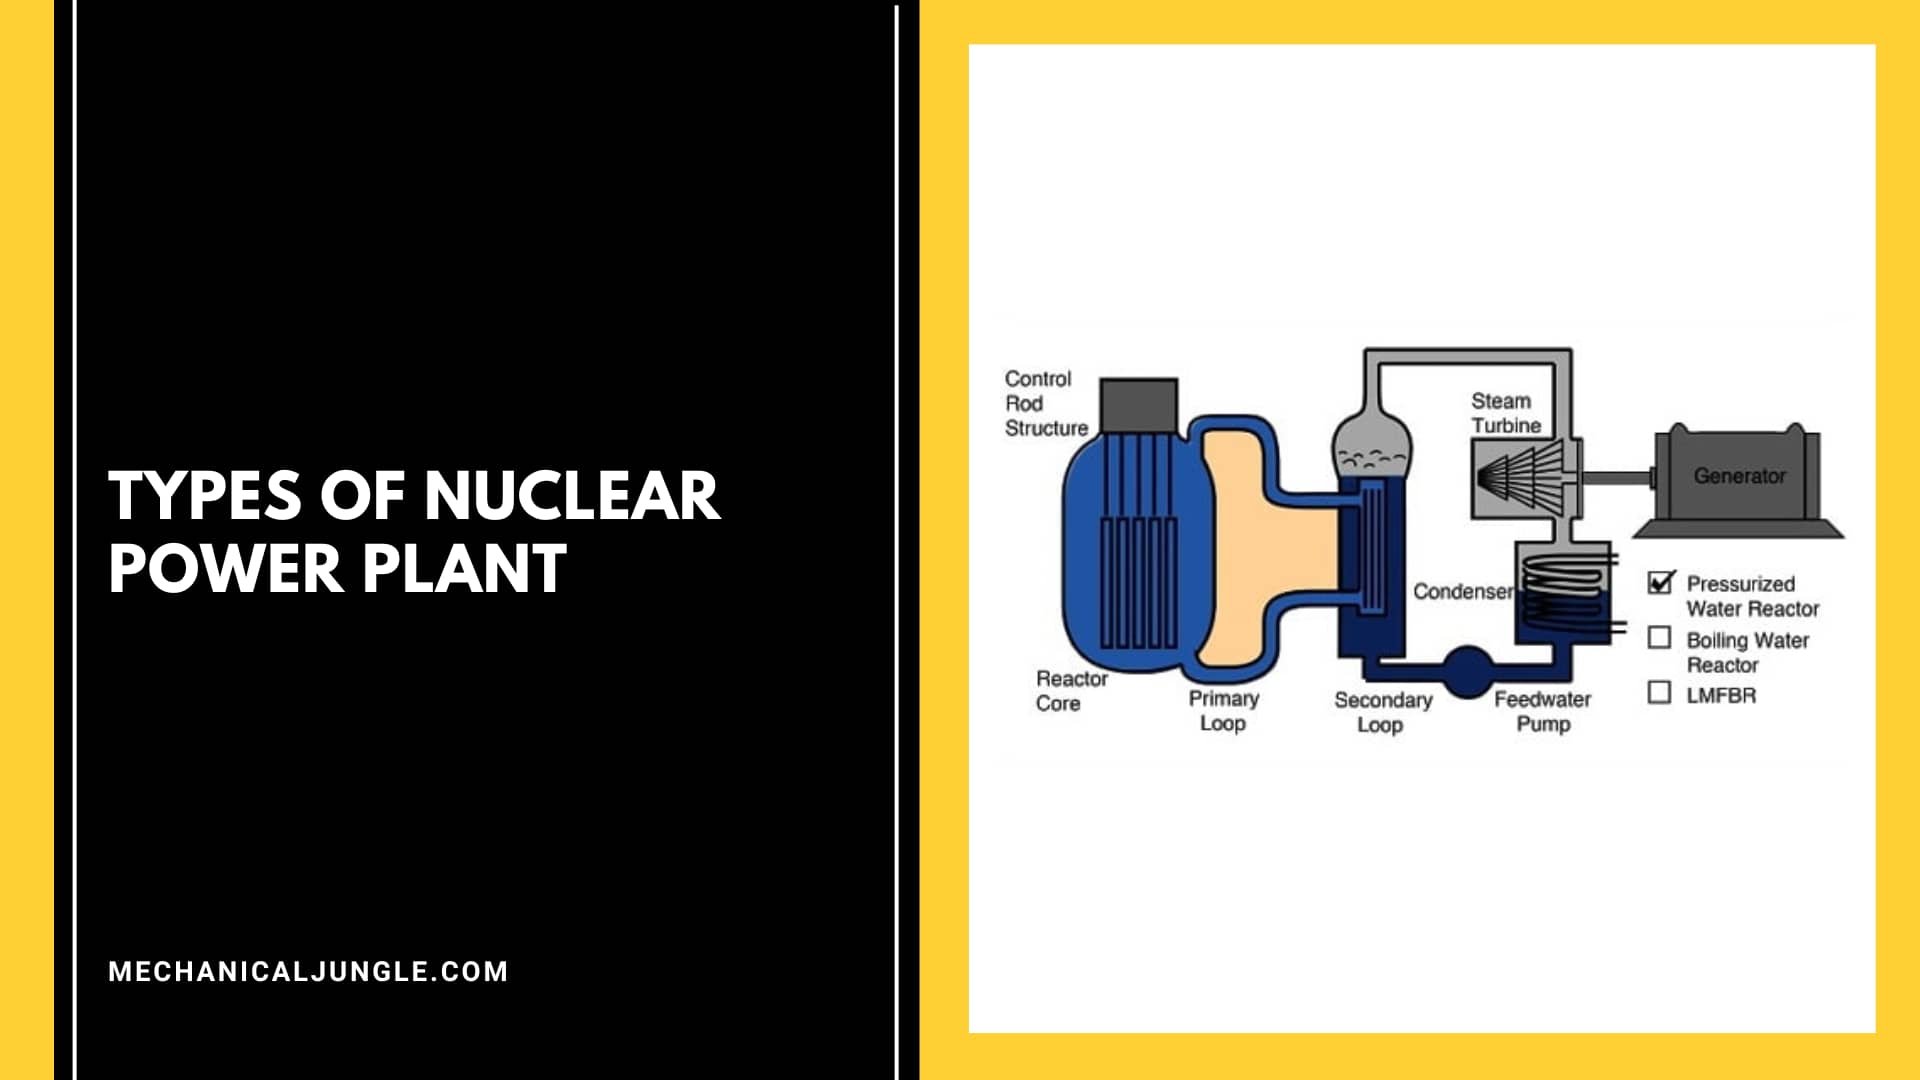 Types of Nuclear Power Plant